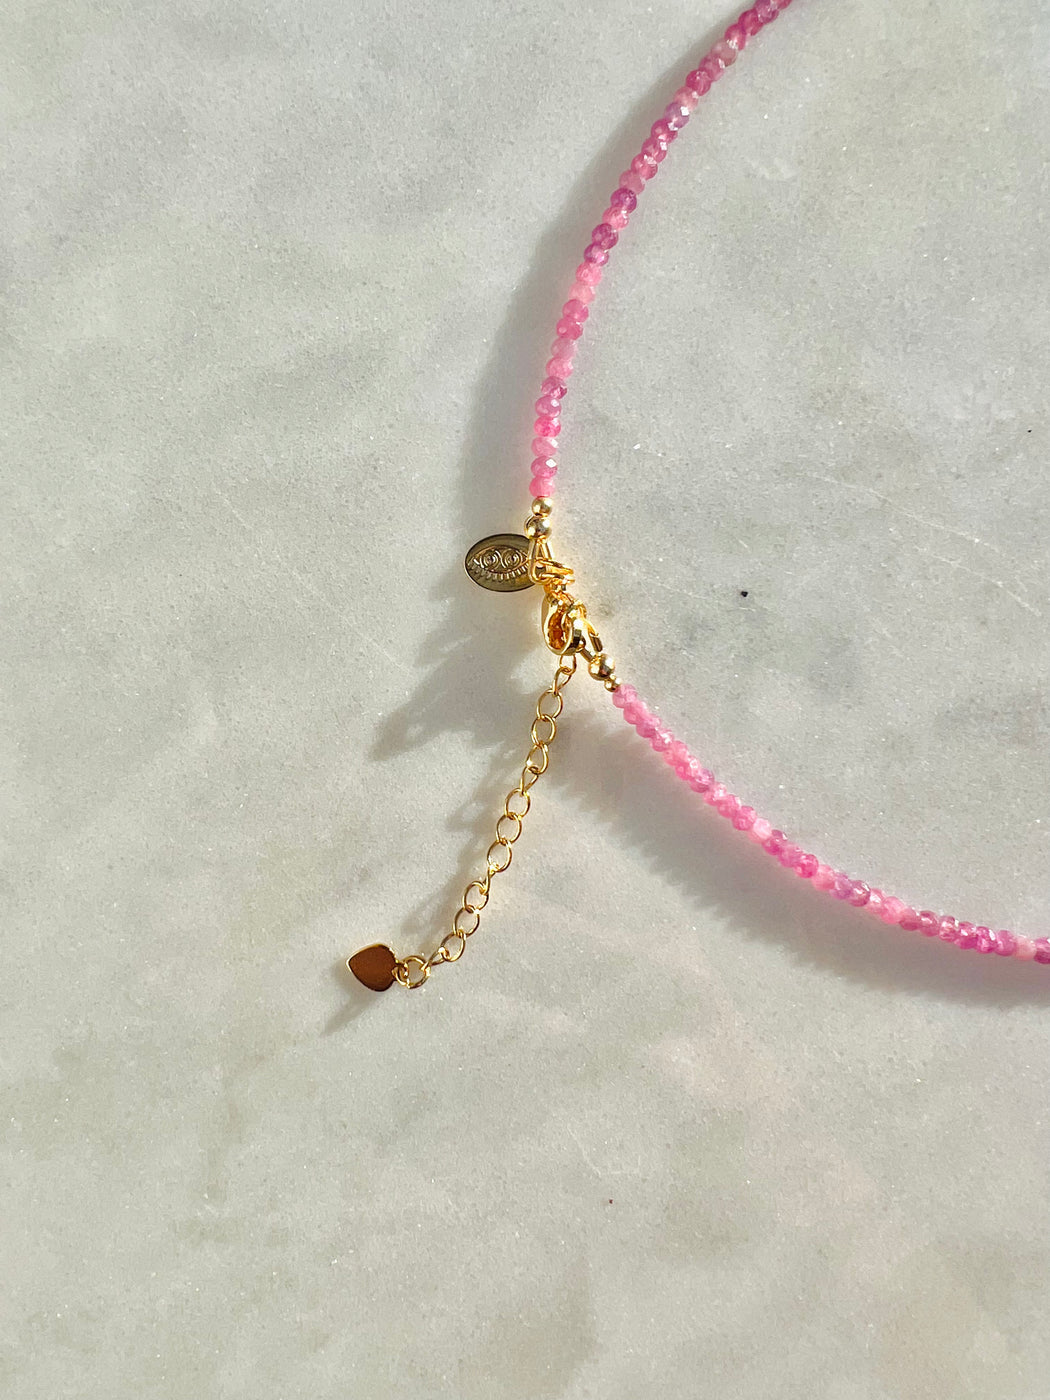 Illuminate the abundance that lives within you - Pink Sapphires remind us of the unlimited love & joy in the universe available to us.   Materials matter: Pink Sapphire's strung on coated gold wire with Gold Fill clasp & star charm. PUNKWASP by Carrie Marill.